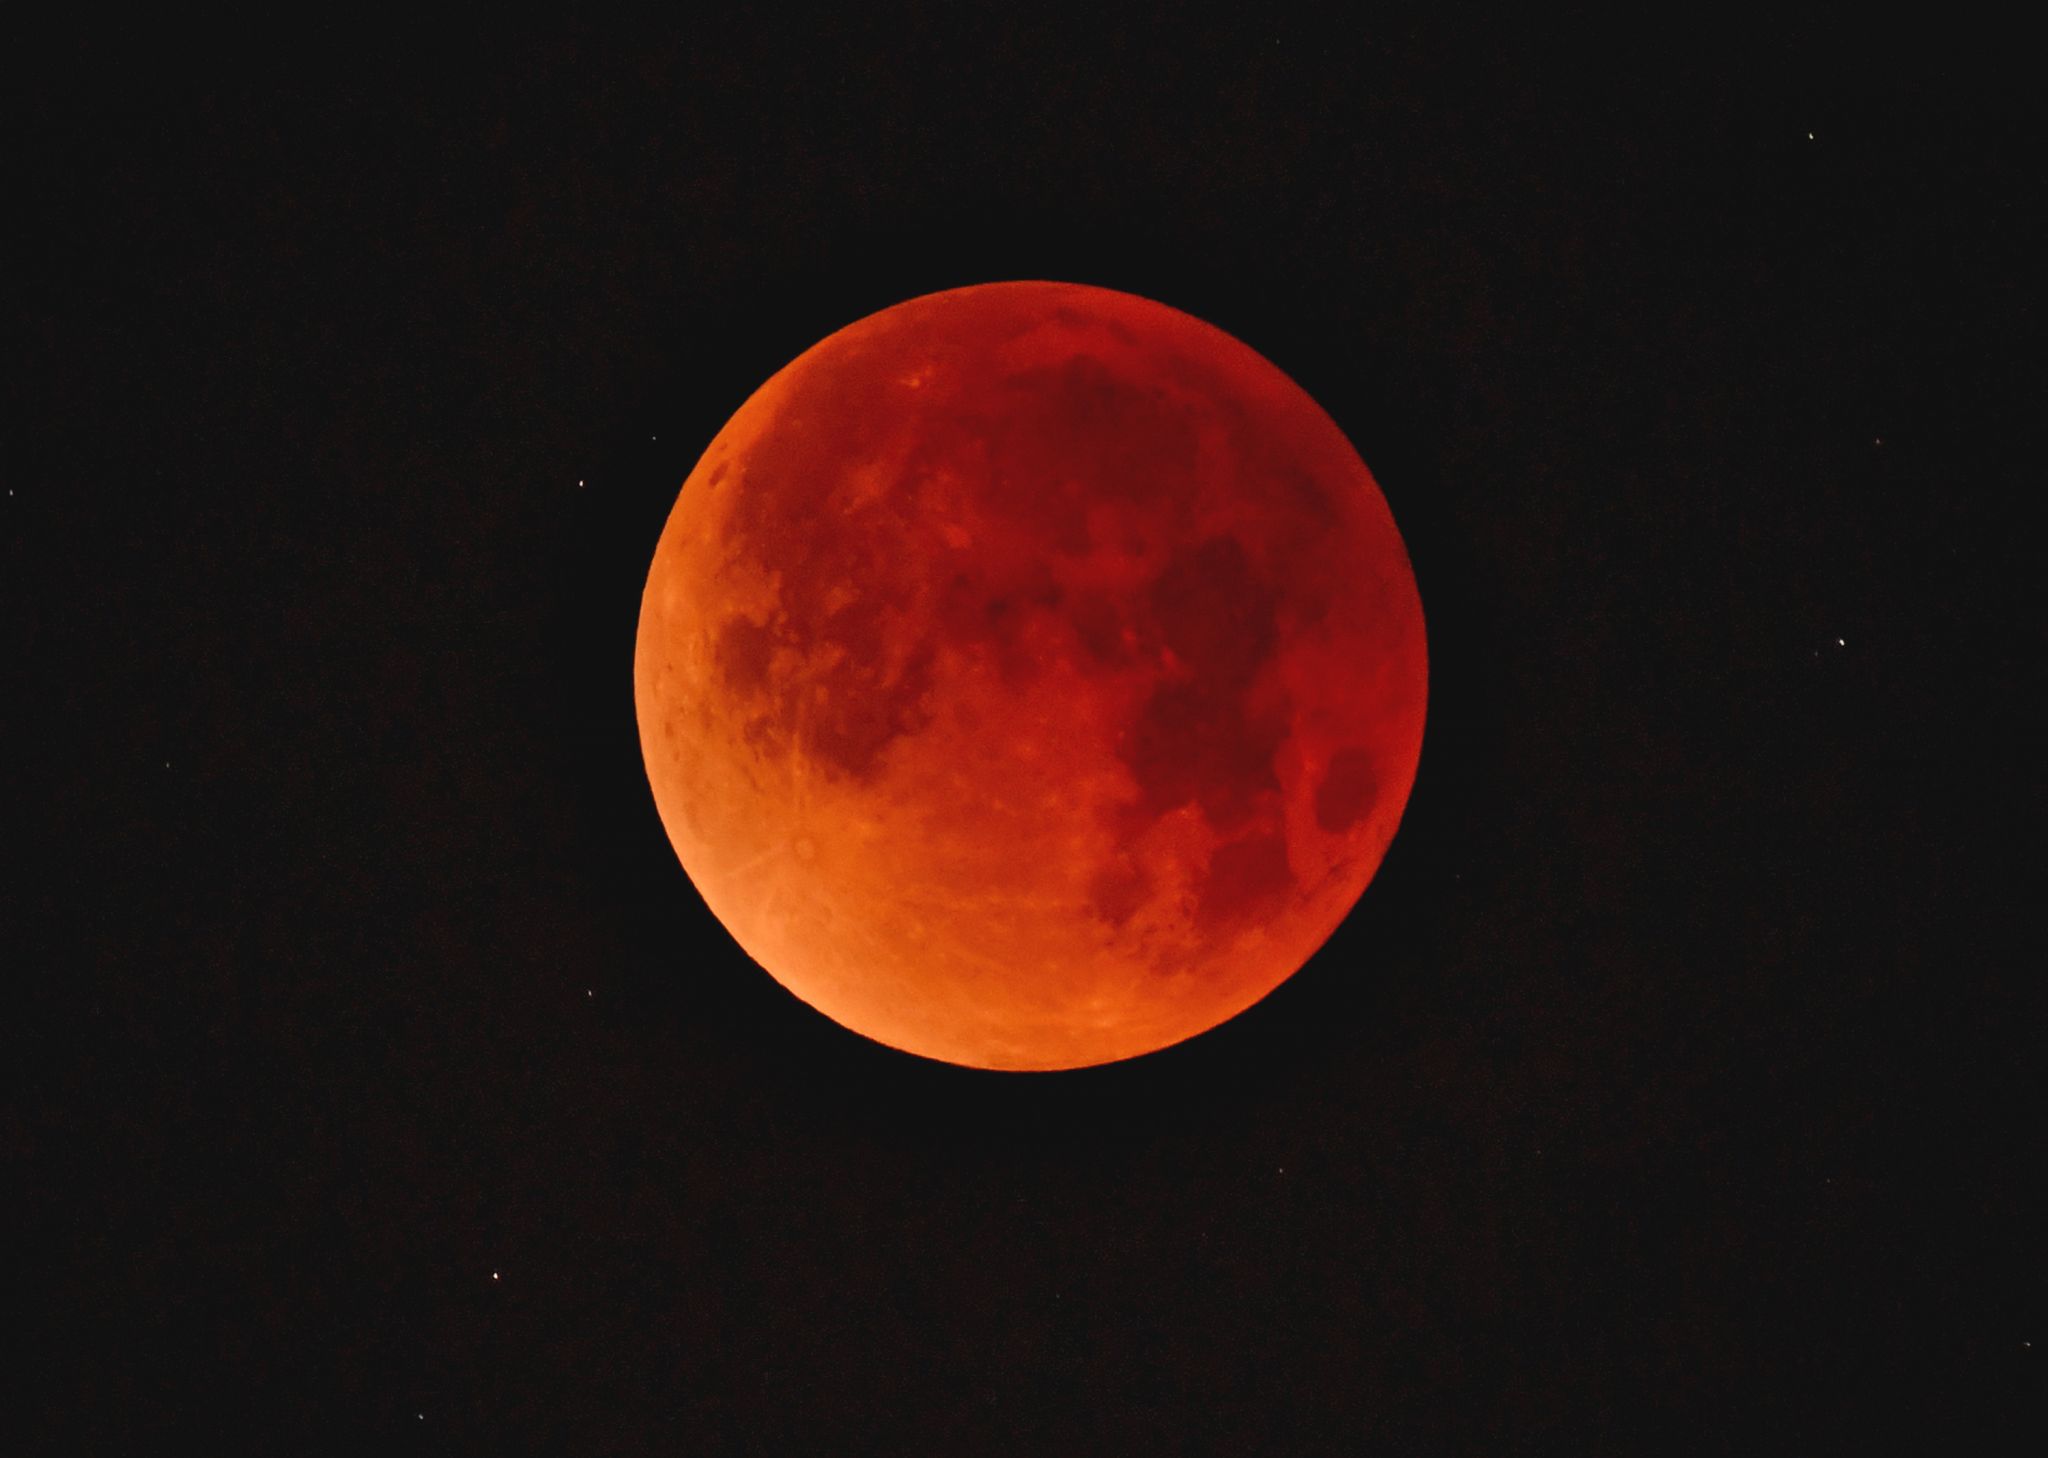 How to watch the 'super blood moon' in the SF Bay Area early Wednesday